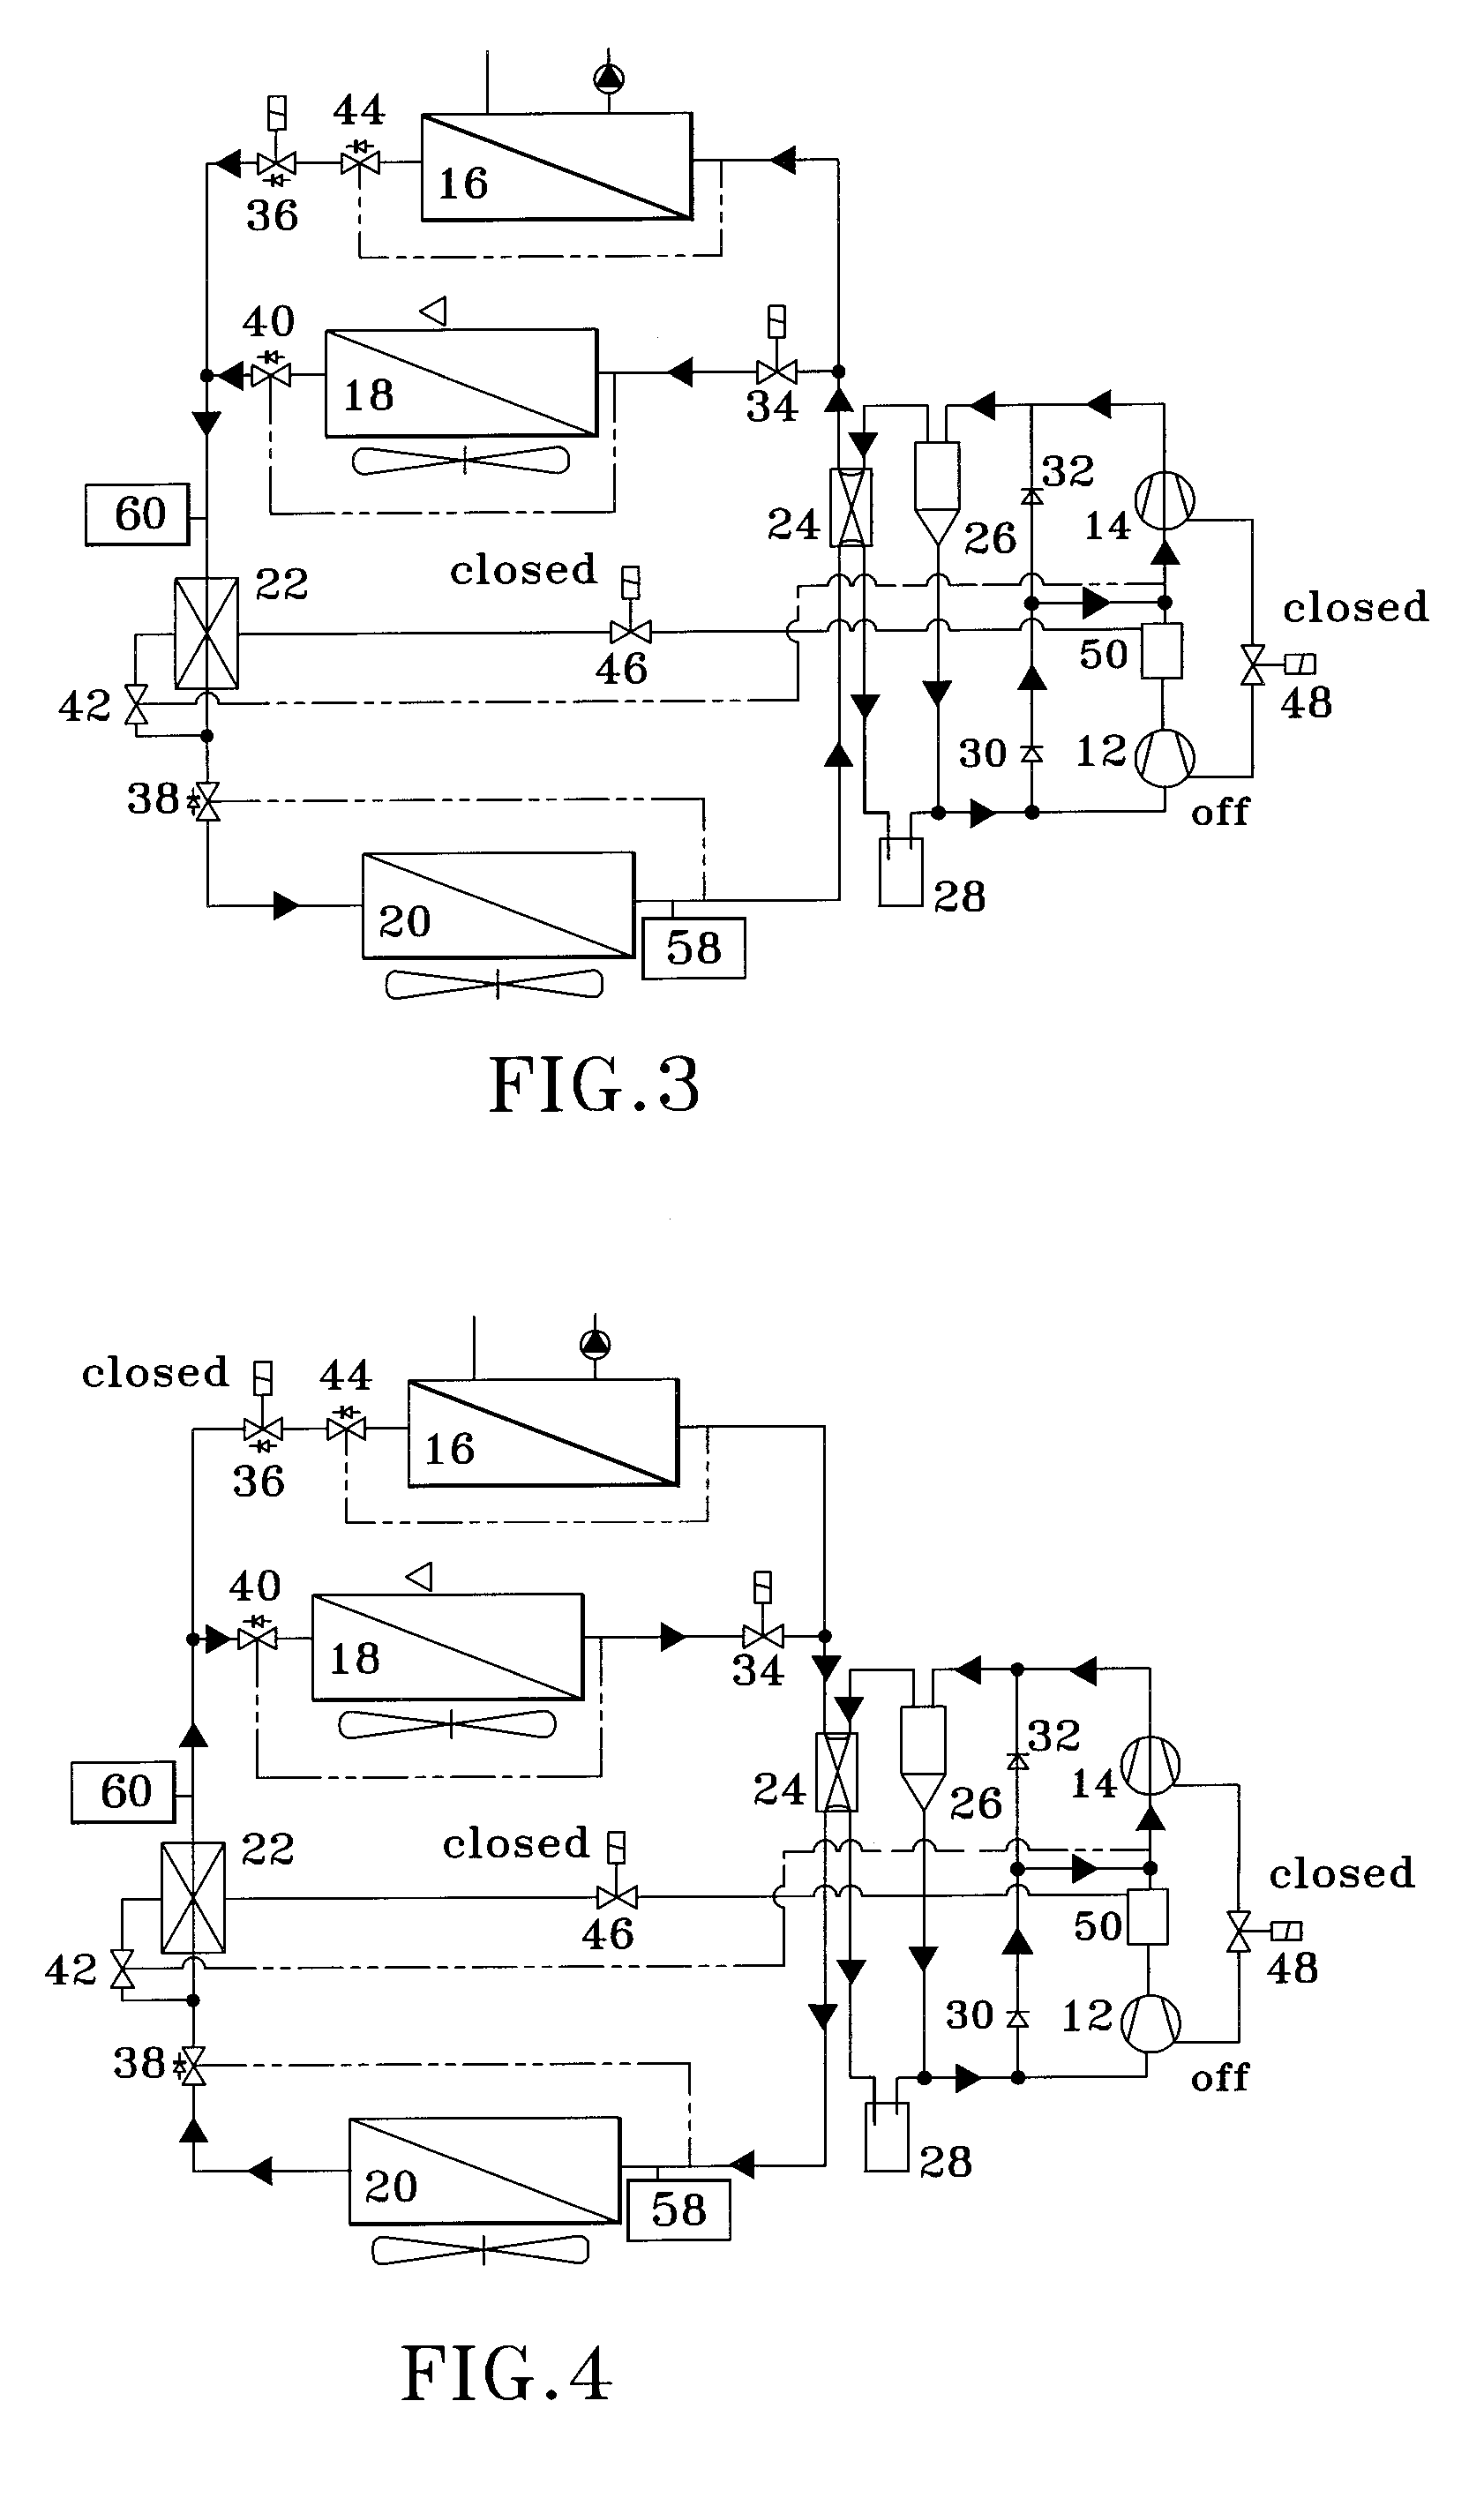 Heat pump system with multi-stage compression